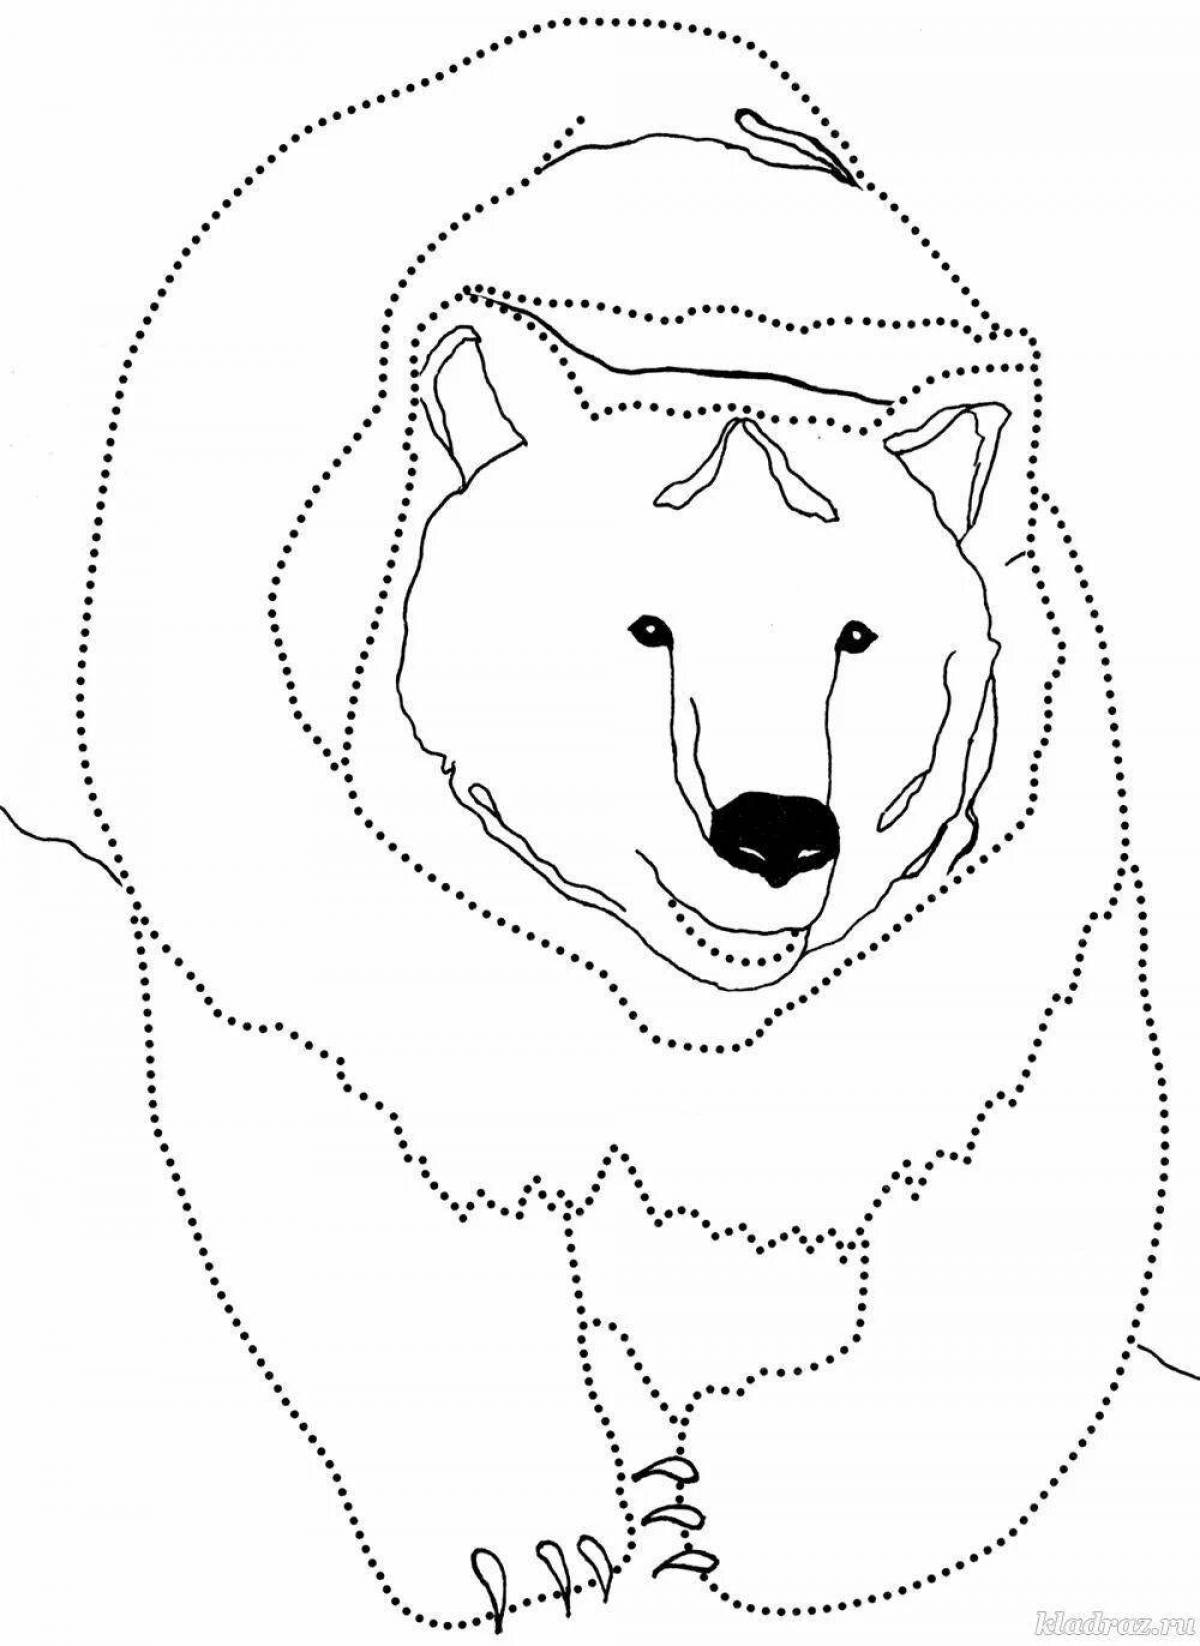 Adorable polar bear coloring book for kids 6-7 years old